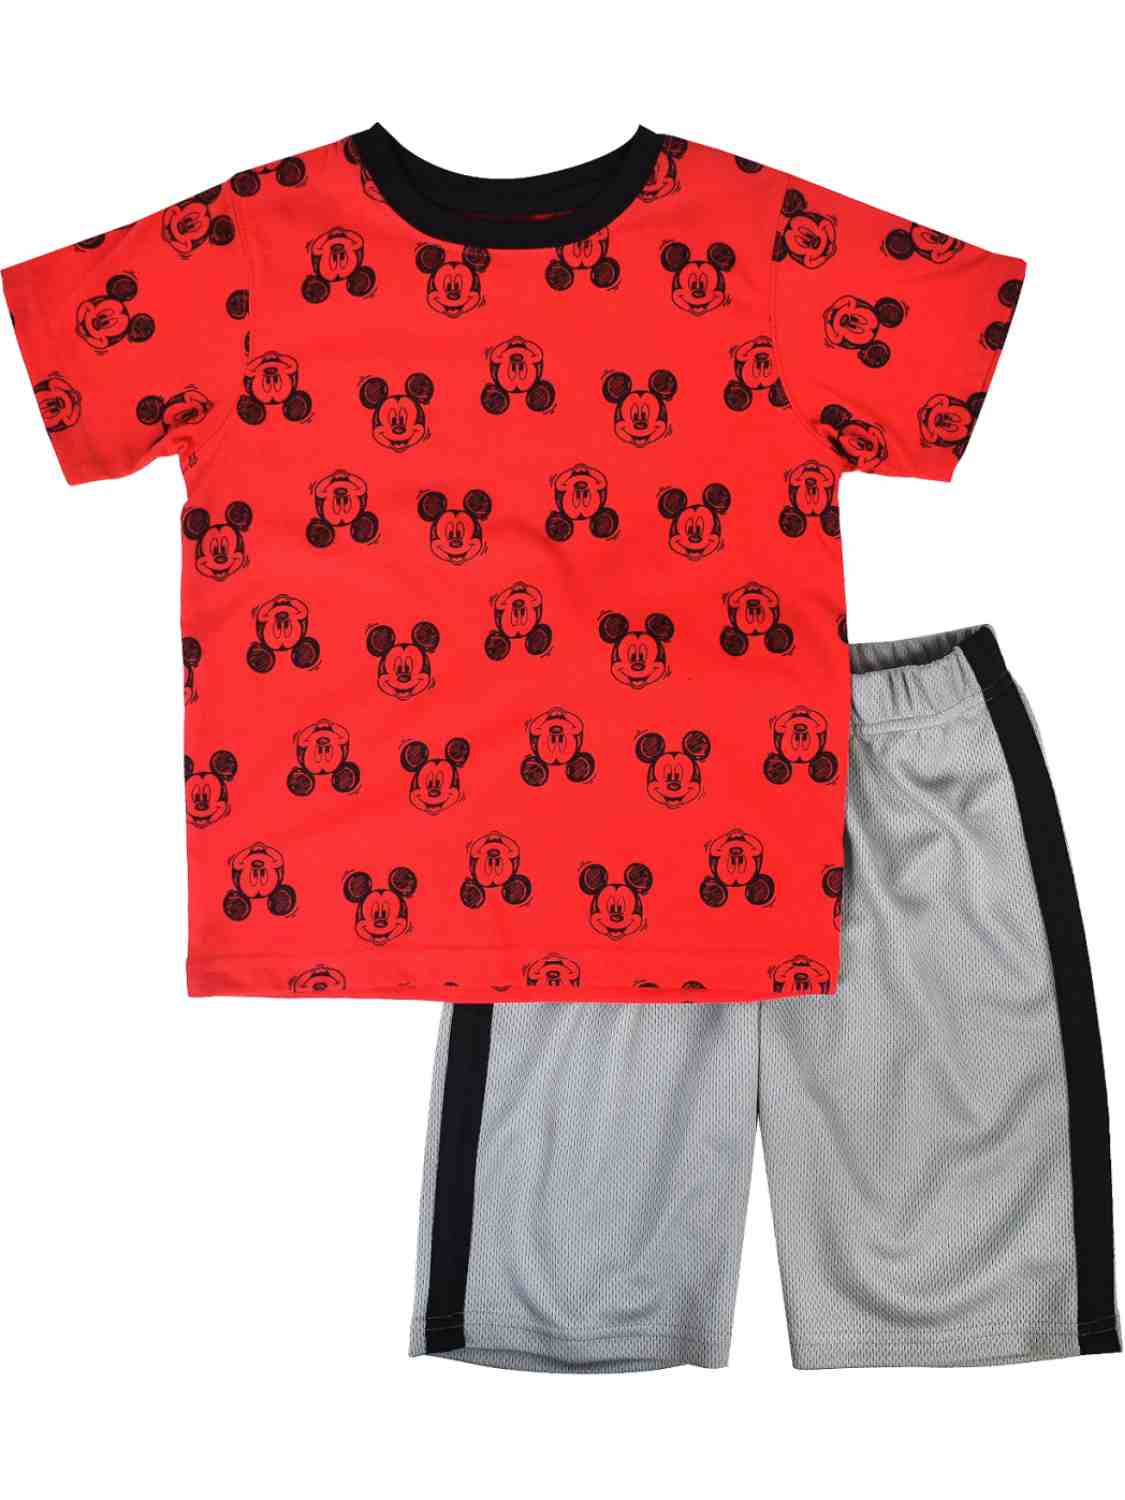 Disney Toddler Boys Mickey Mouse Face Outfit Red Shirt & Gray Shorts Set